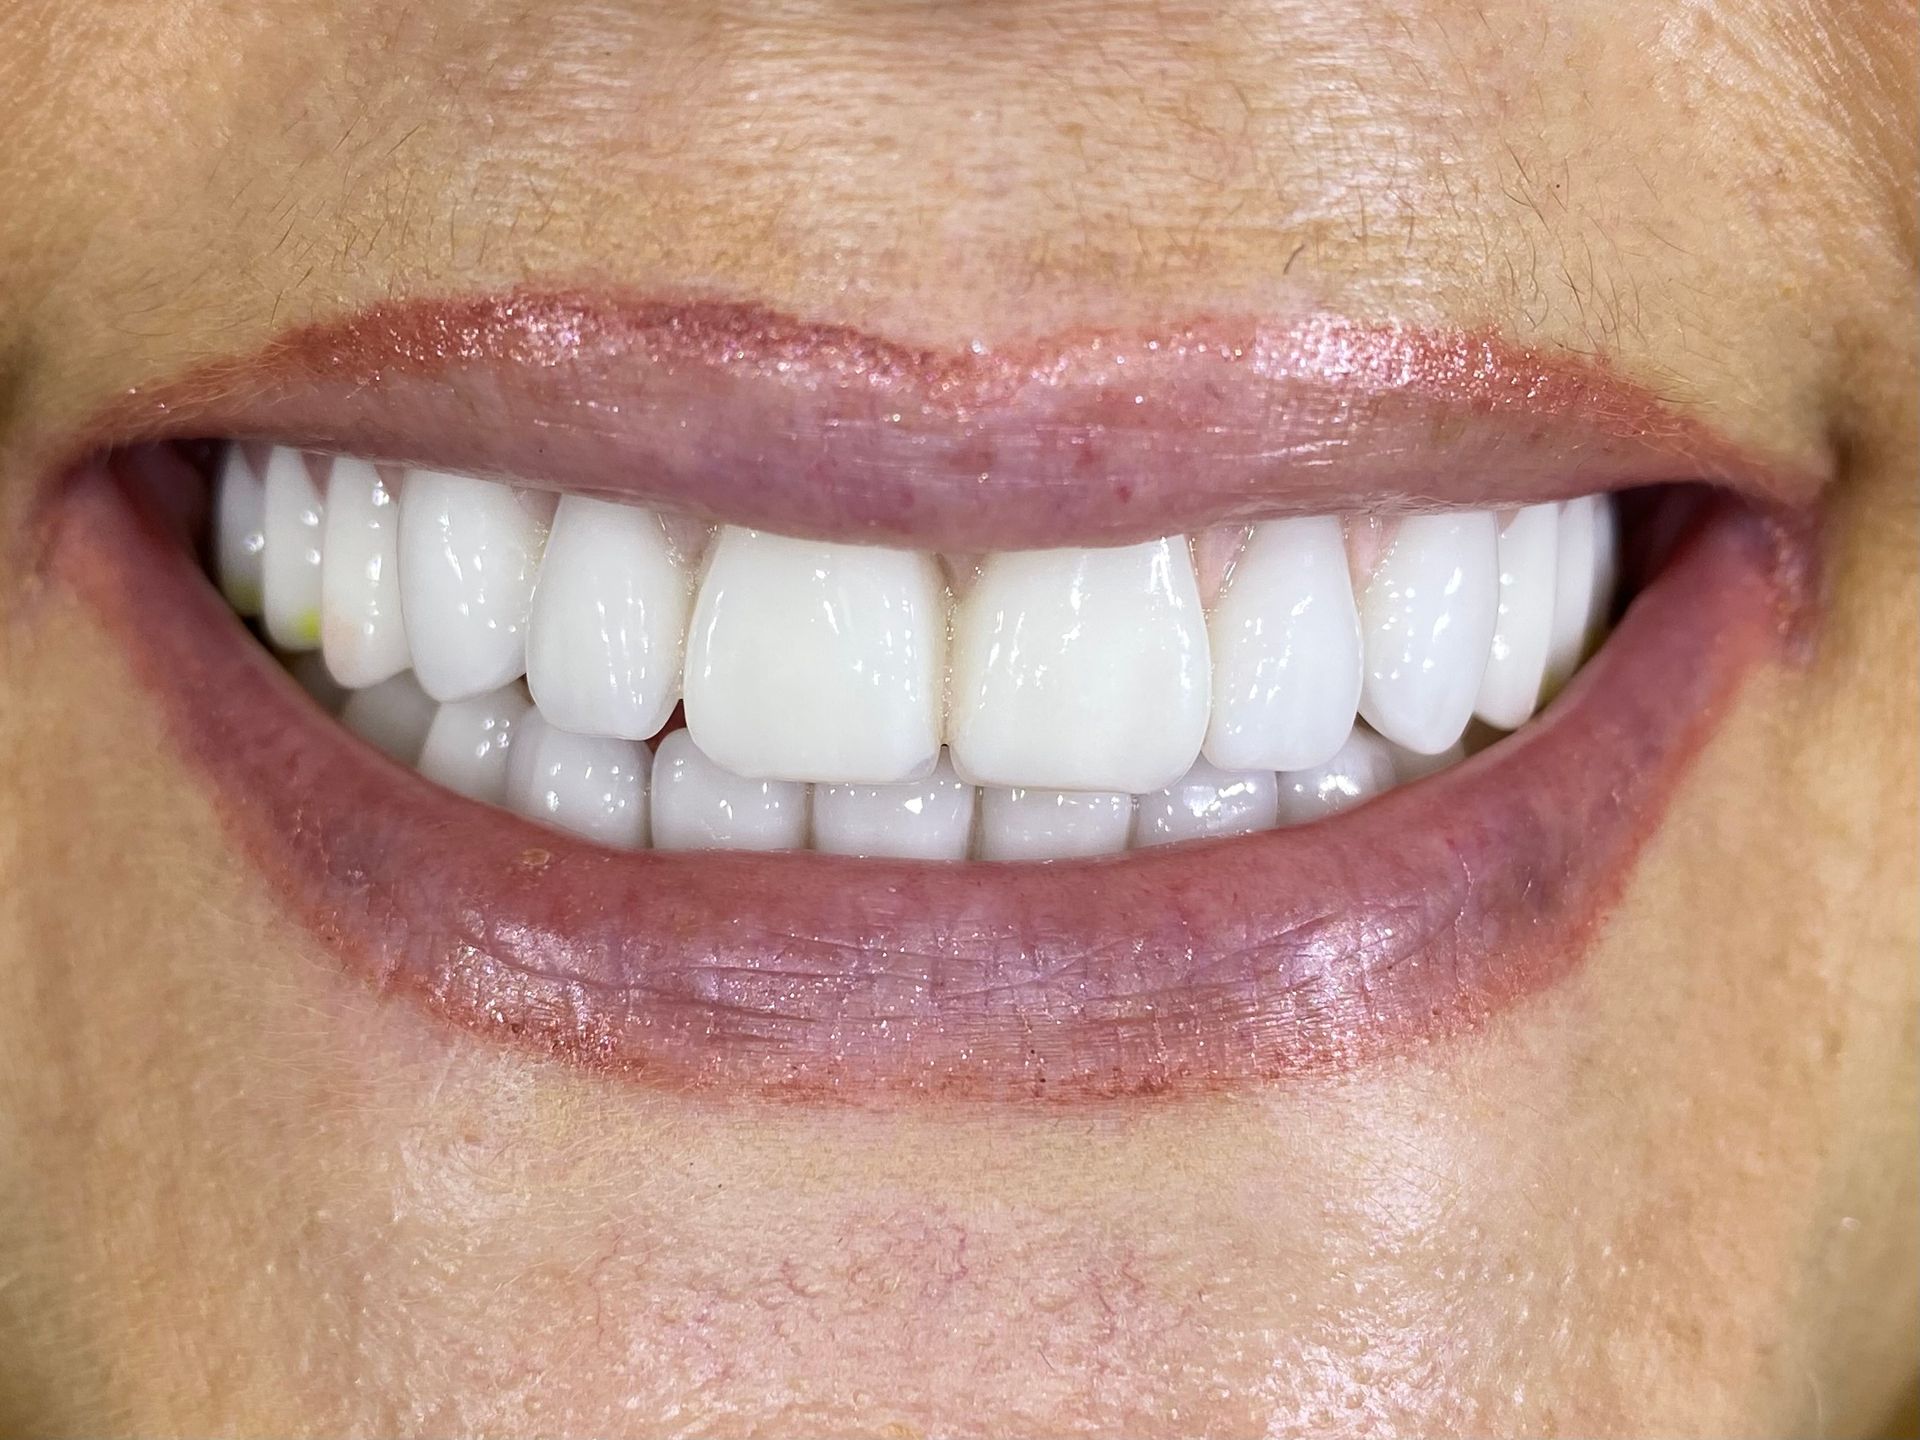 a close up of a woman 's smile with white teeth and red lips | Before and After Denture Treatment | Envision Denture and Implant Centre | Best Denturist In Surrey, British Columbia